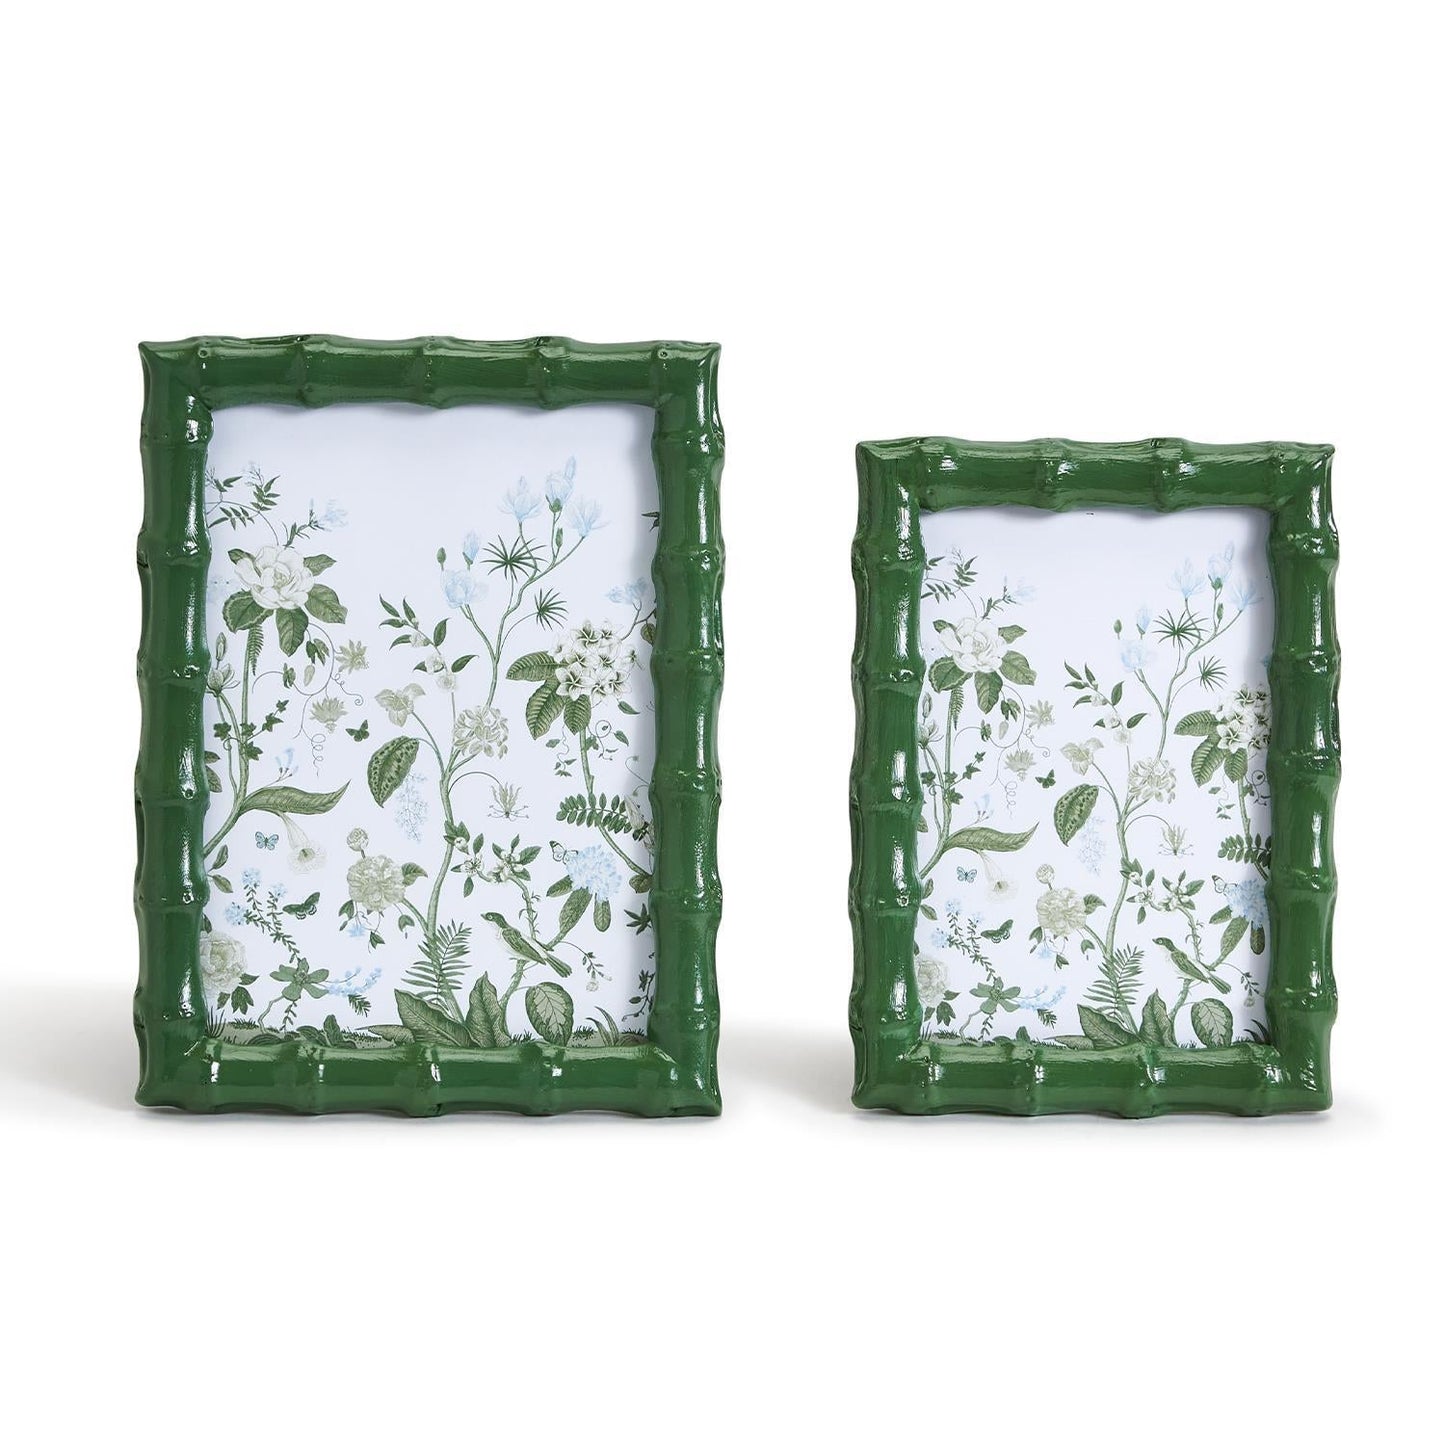 Countryside Green Frame - 5x7 Home Decor Two's Company   